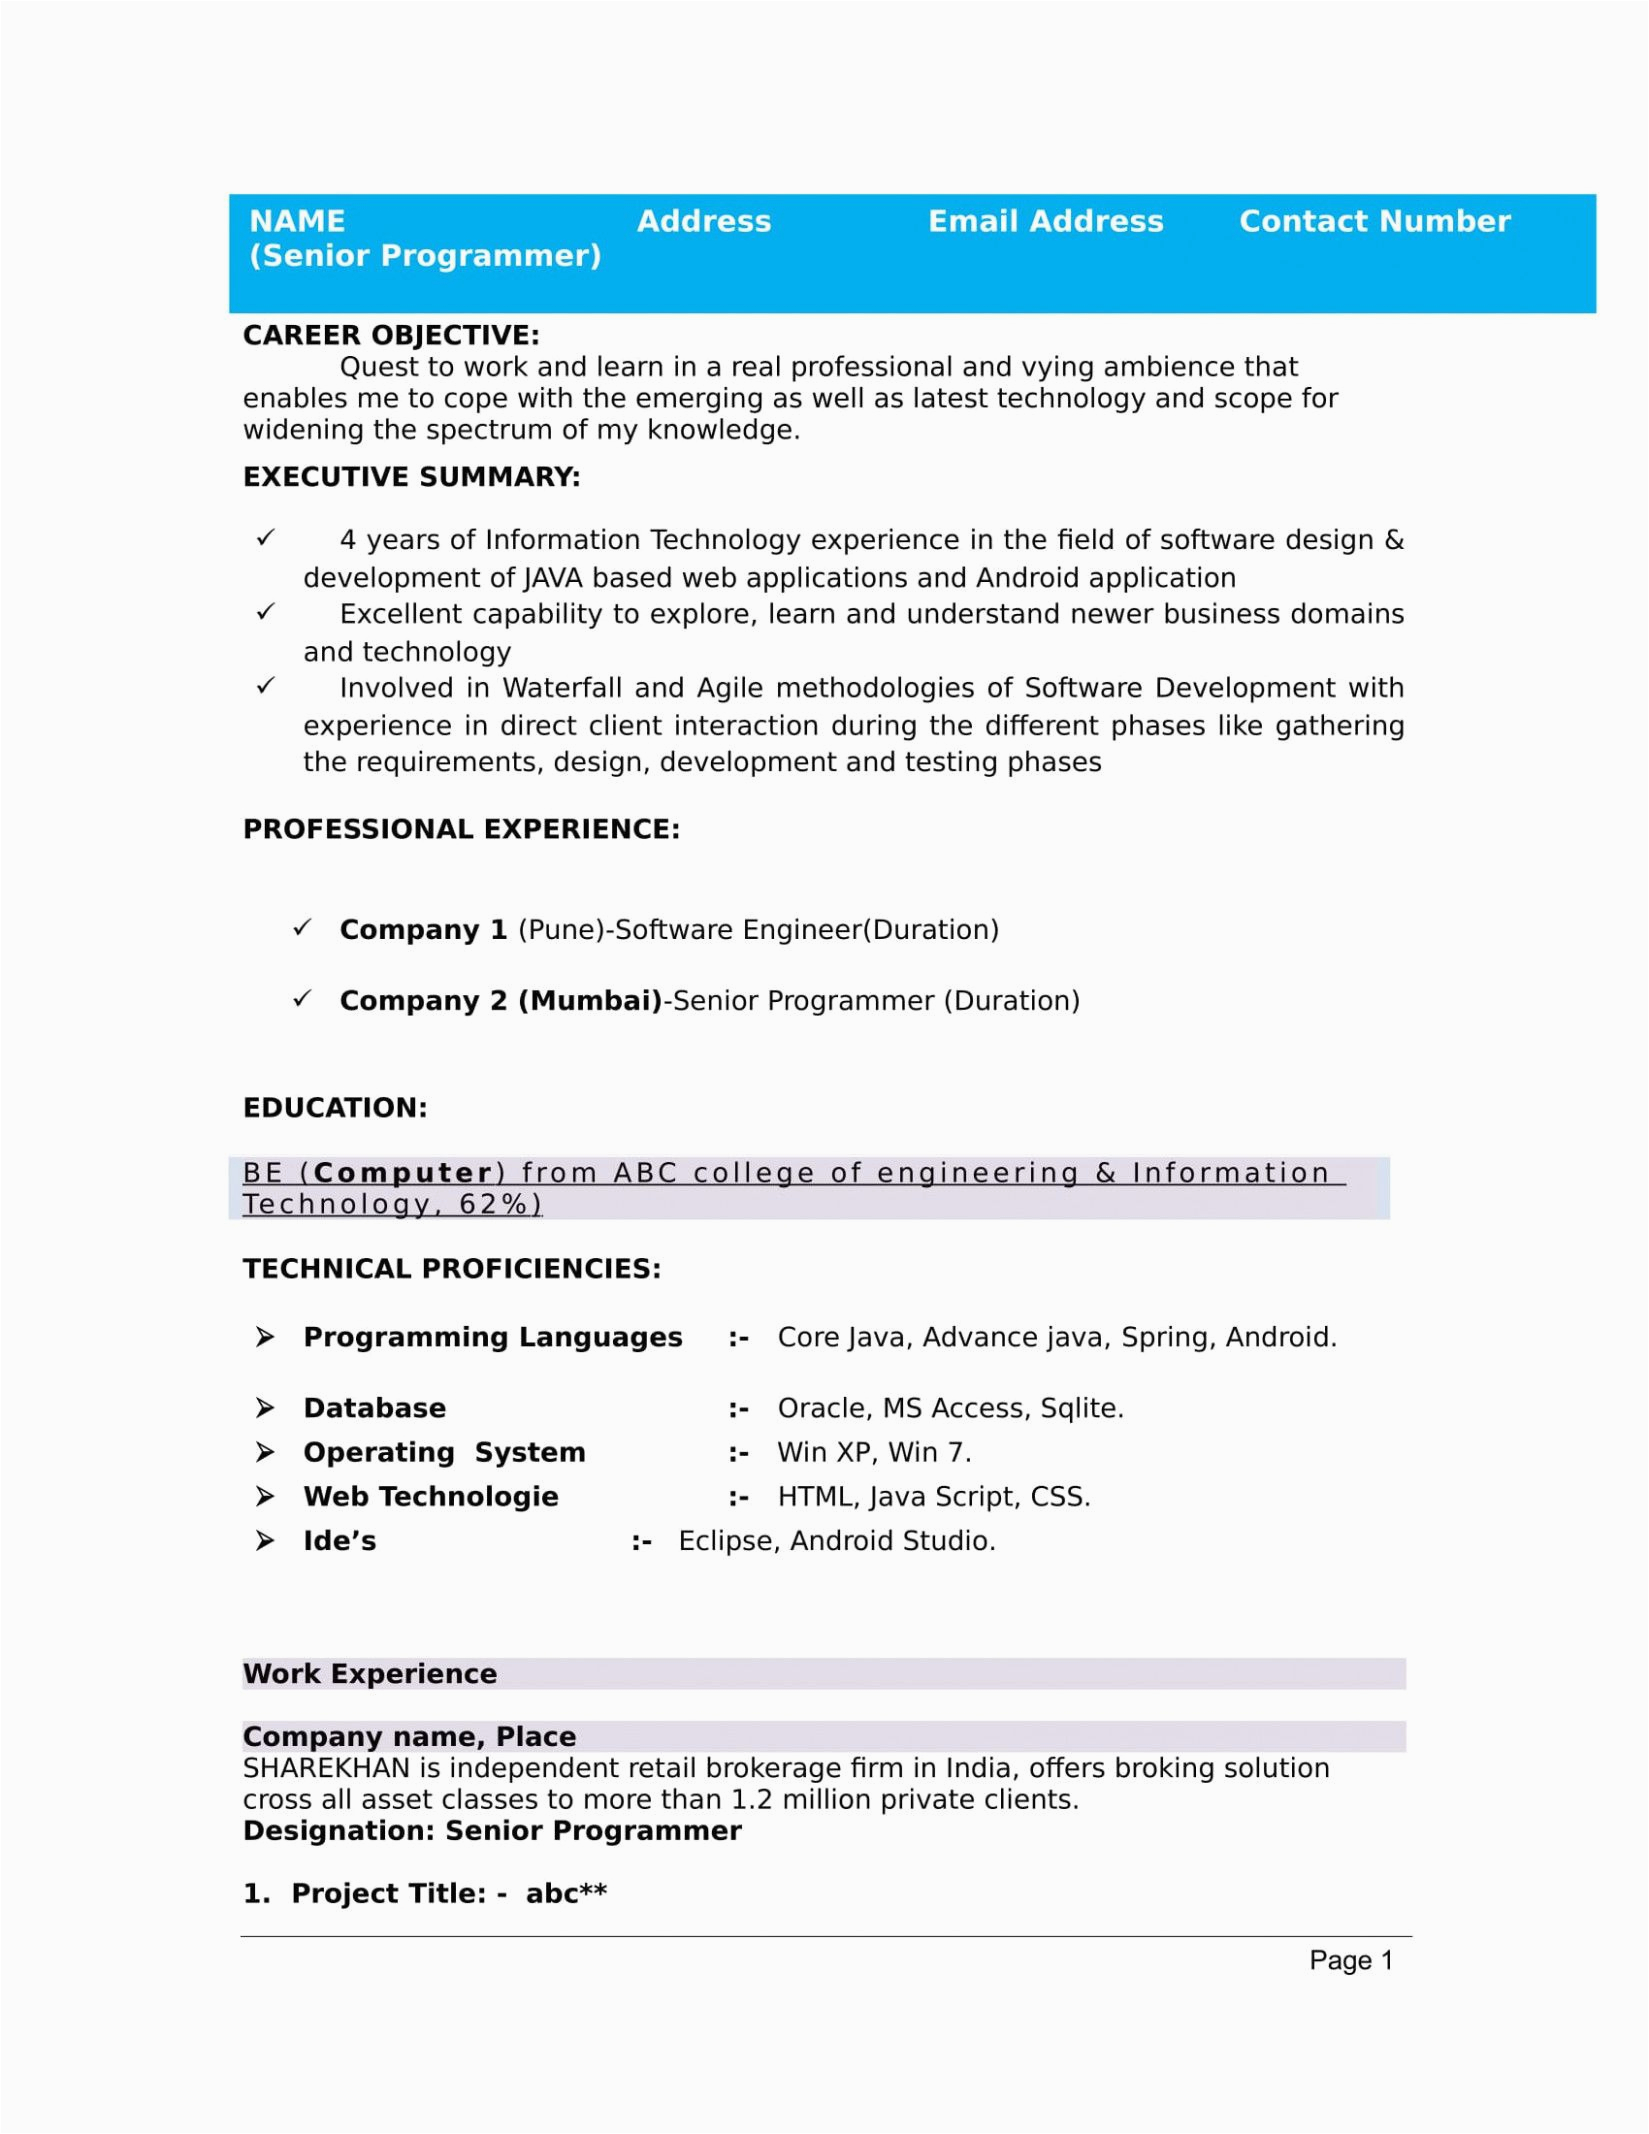 Content Writing Resume Samples for Freshers Content Writing Resume for Freshers Resume